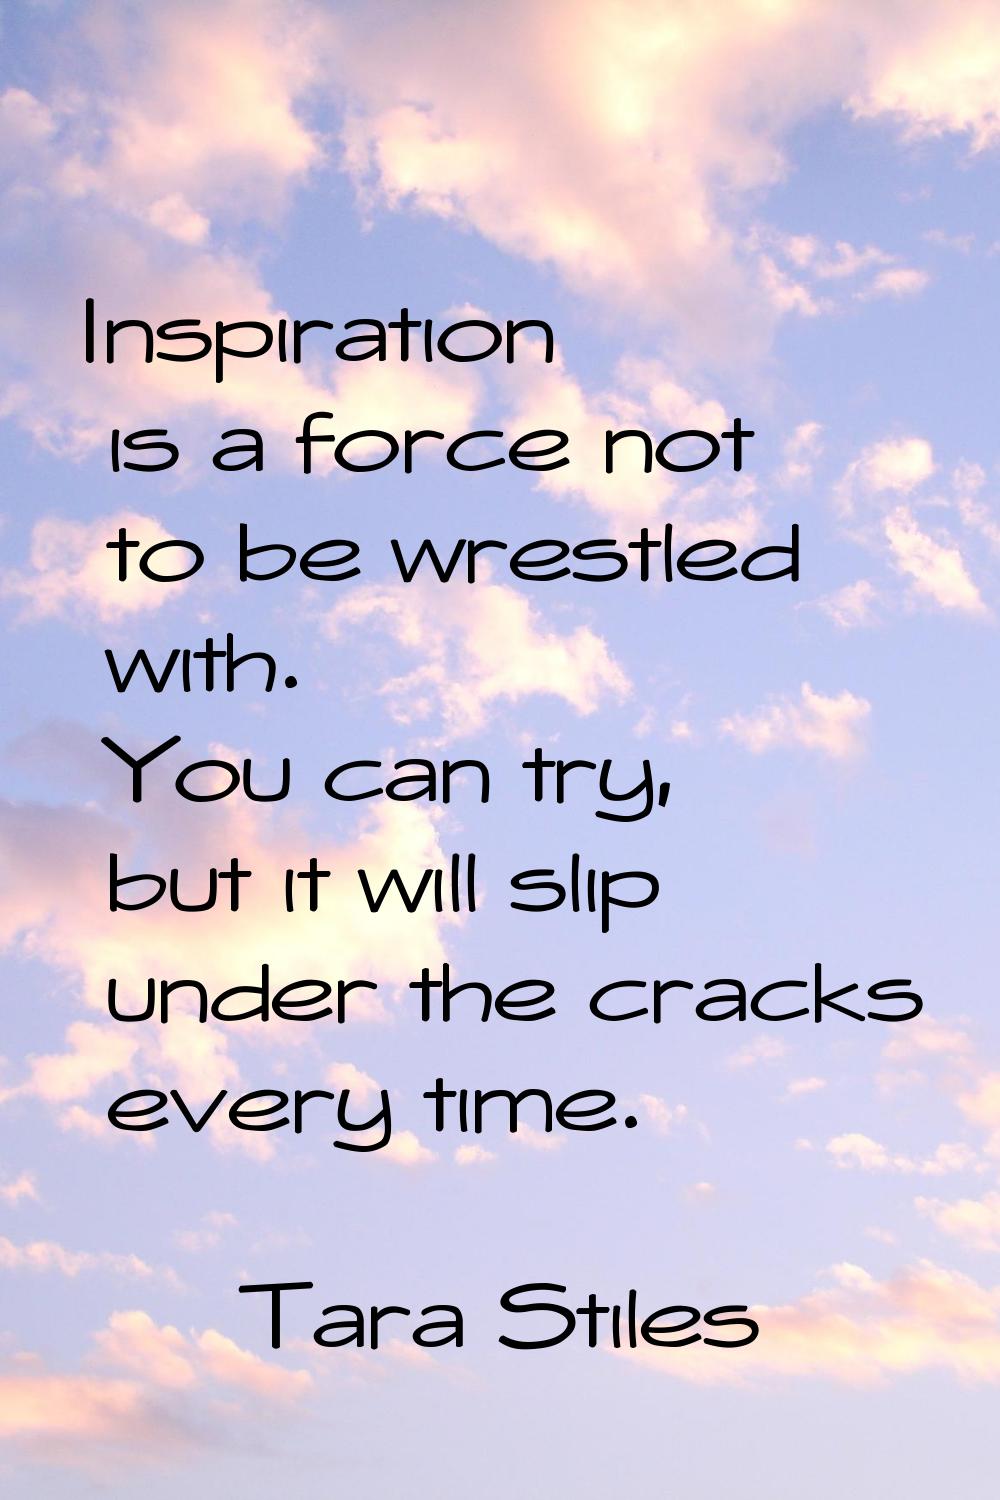 Inspiration is a force not to be wrestled with. You can try, but it will slip under the cracks ever